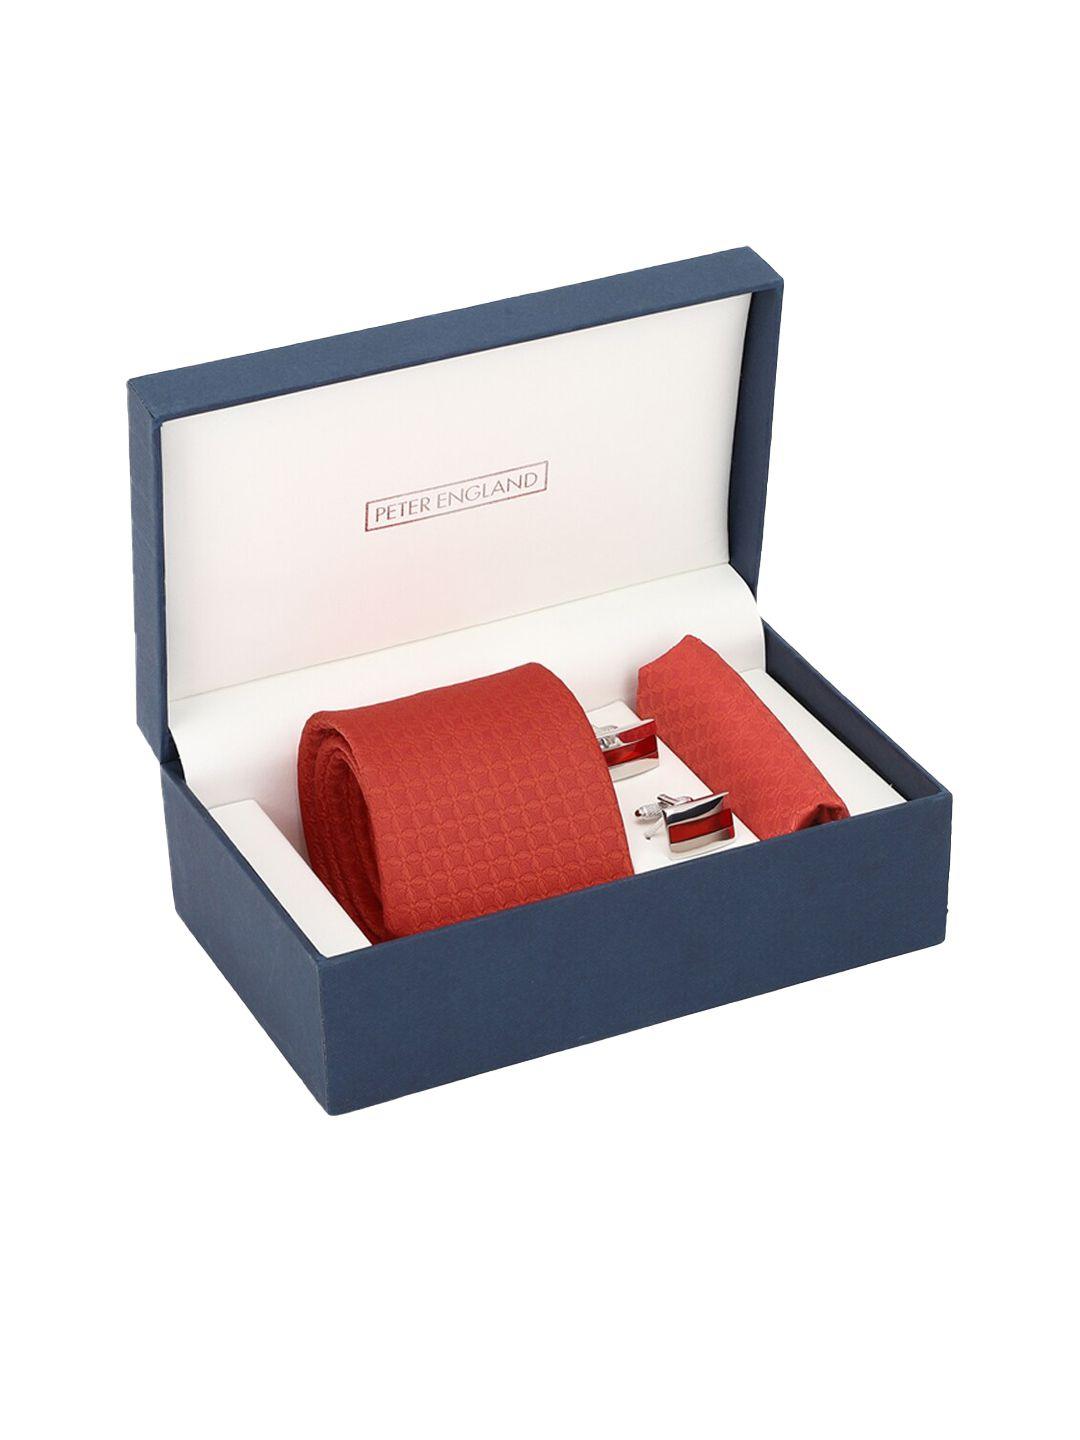 peter-england-men-red-accessory-gift-set